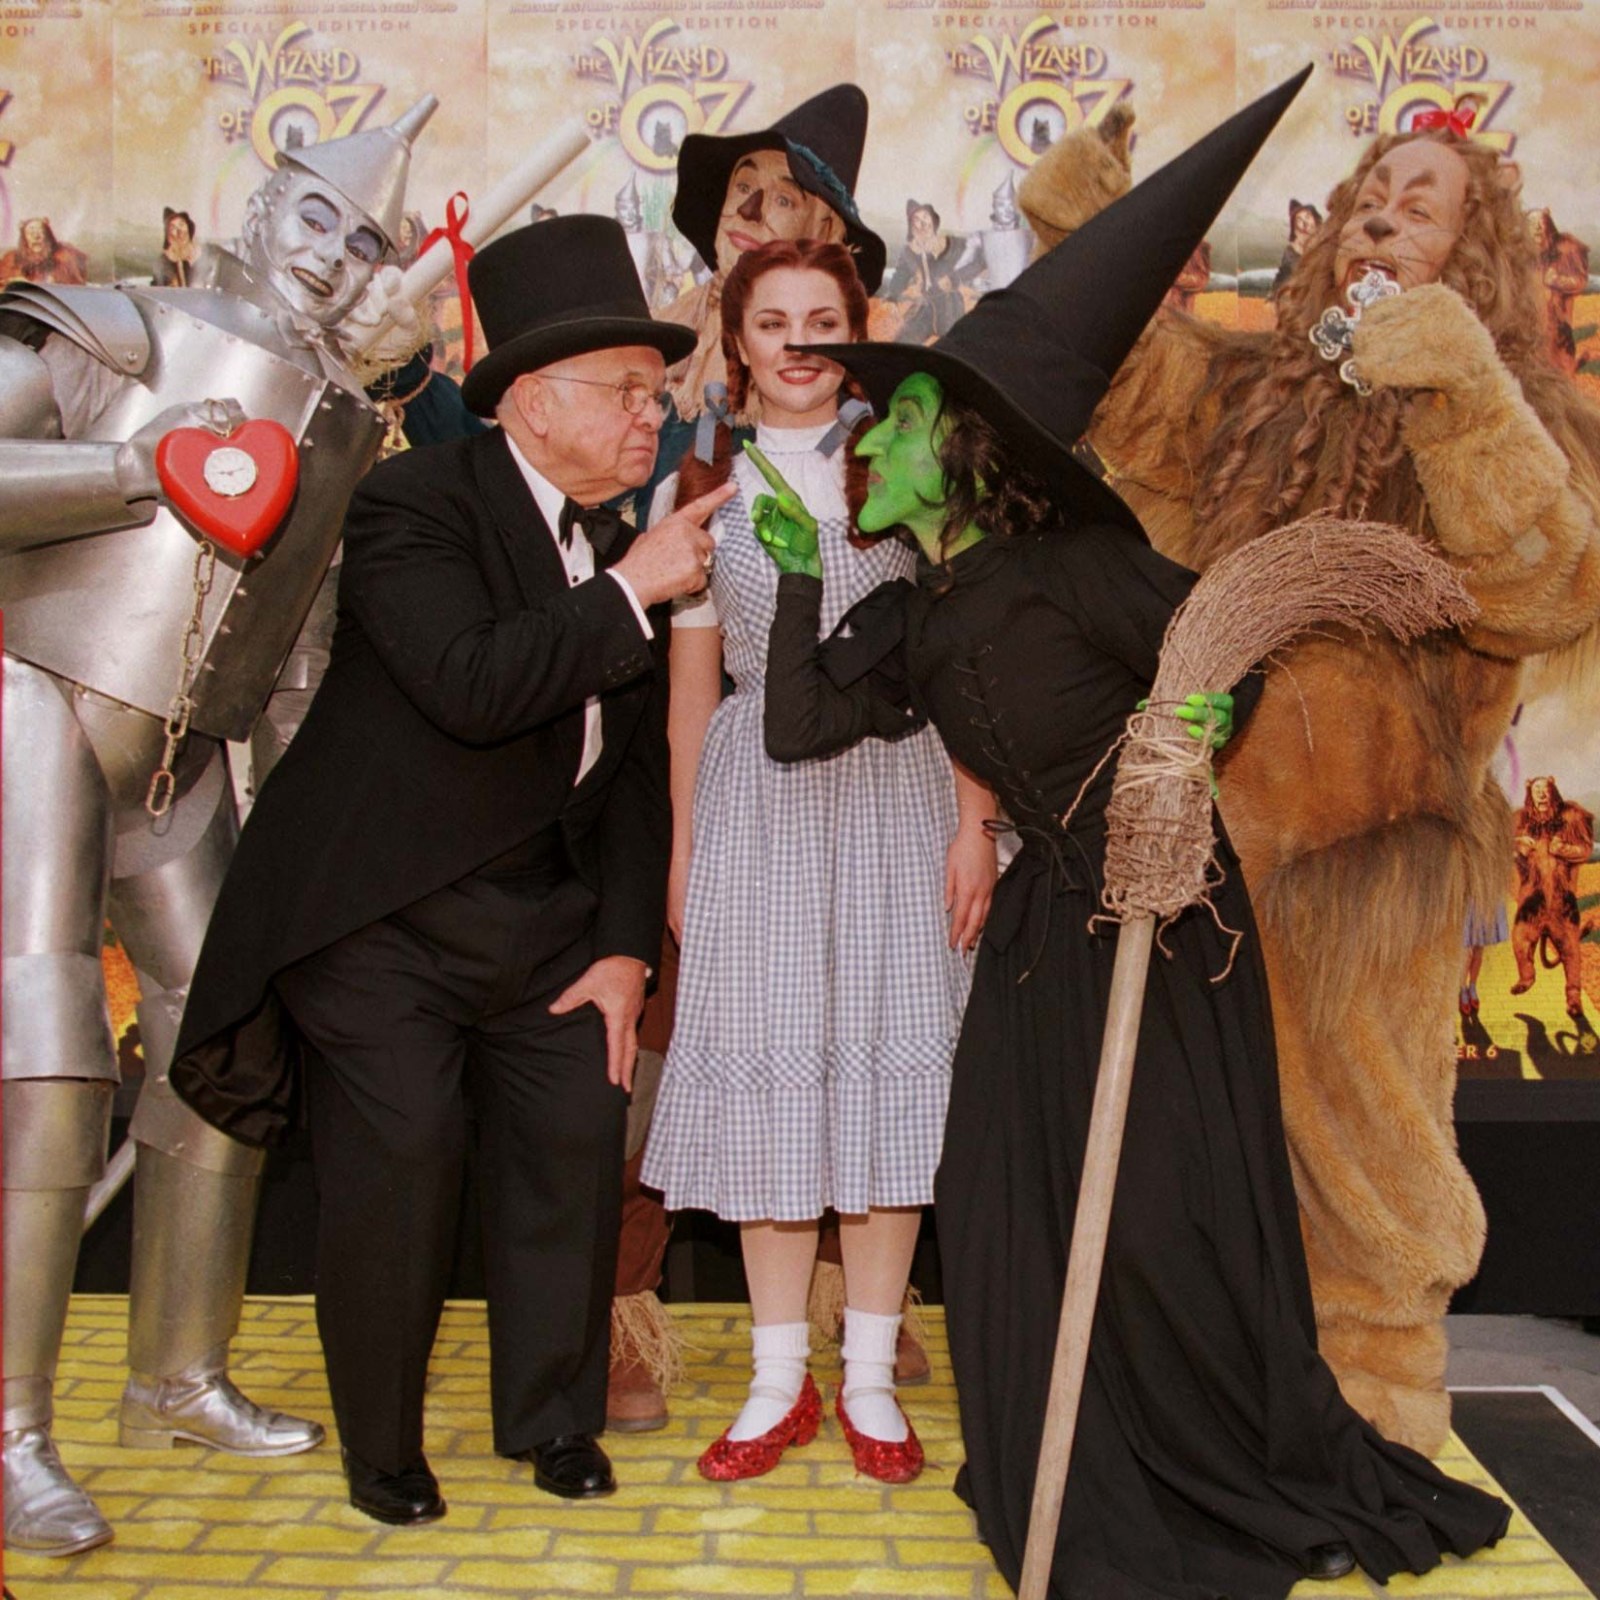 What Donald Trump Could Learn From The Wizard Of Oz